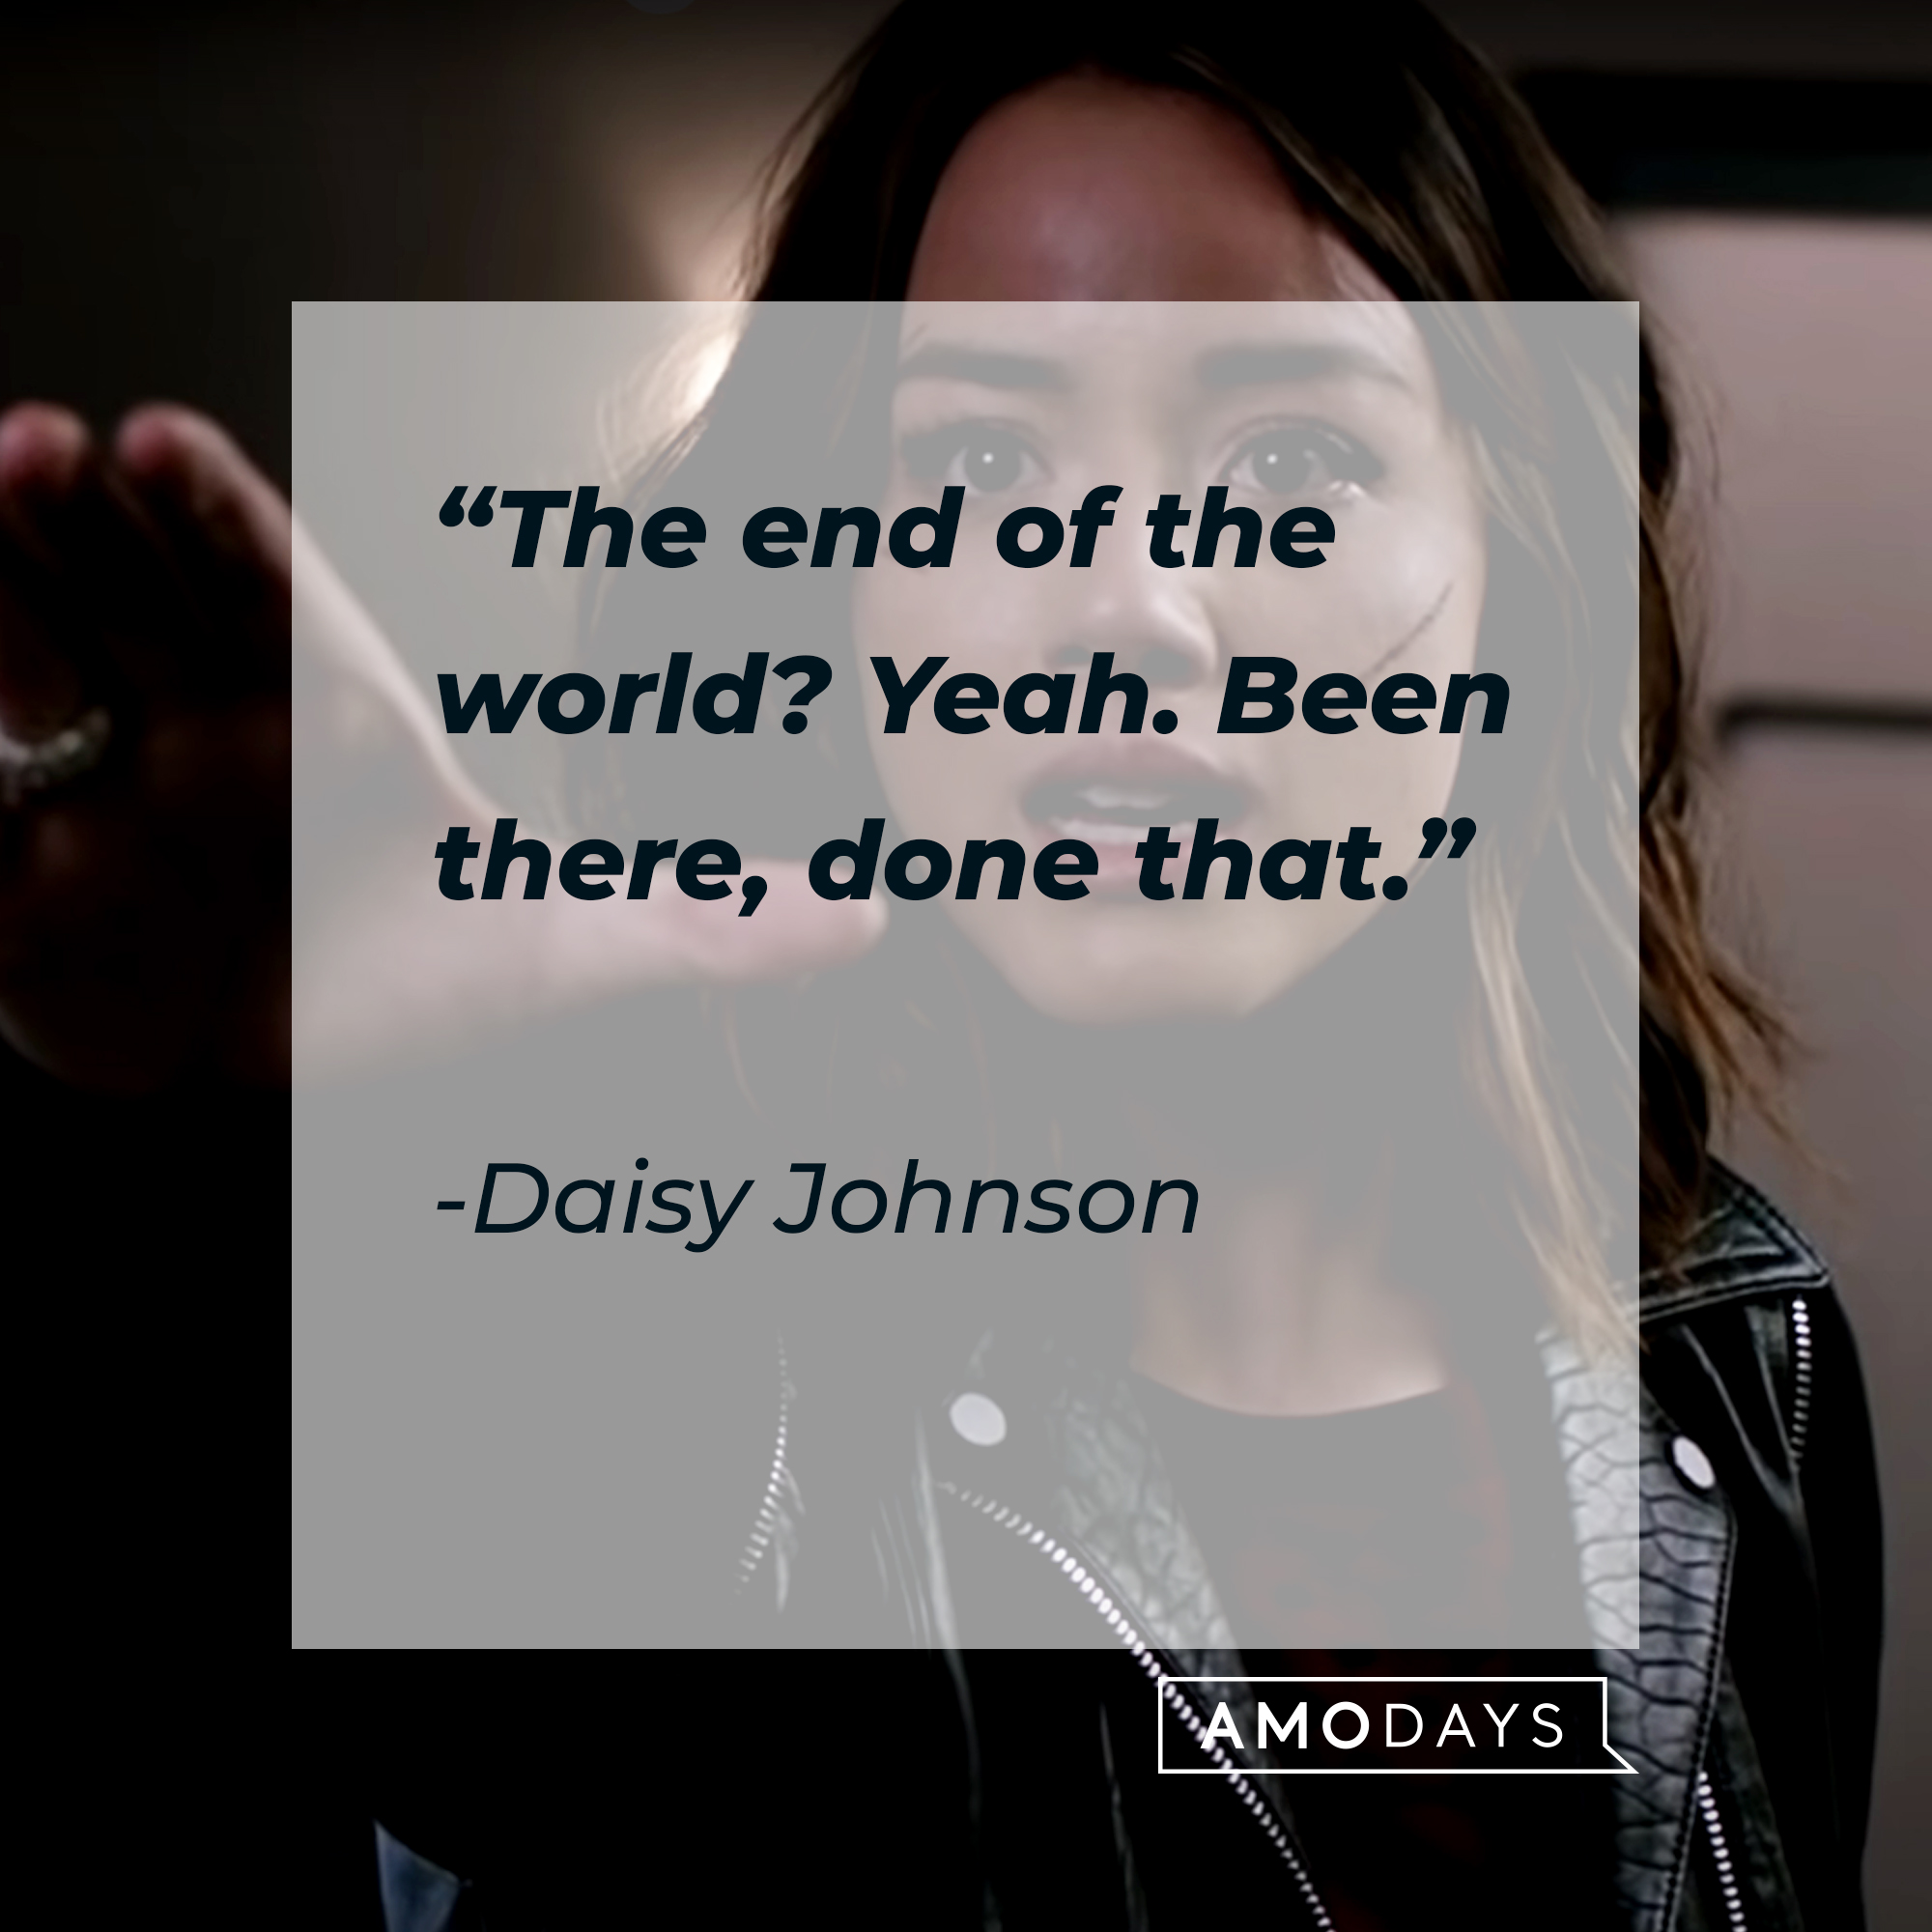 Daisy Johnson with her quote: "The end of the world? Yeah. Been there, done that." | Source: Facebook.com/AgentsofShield